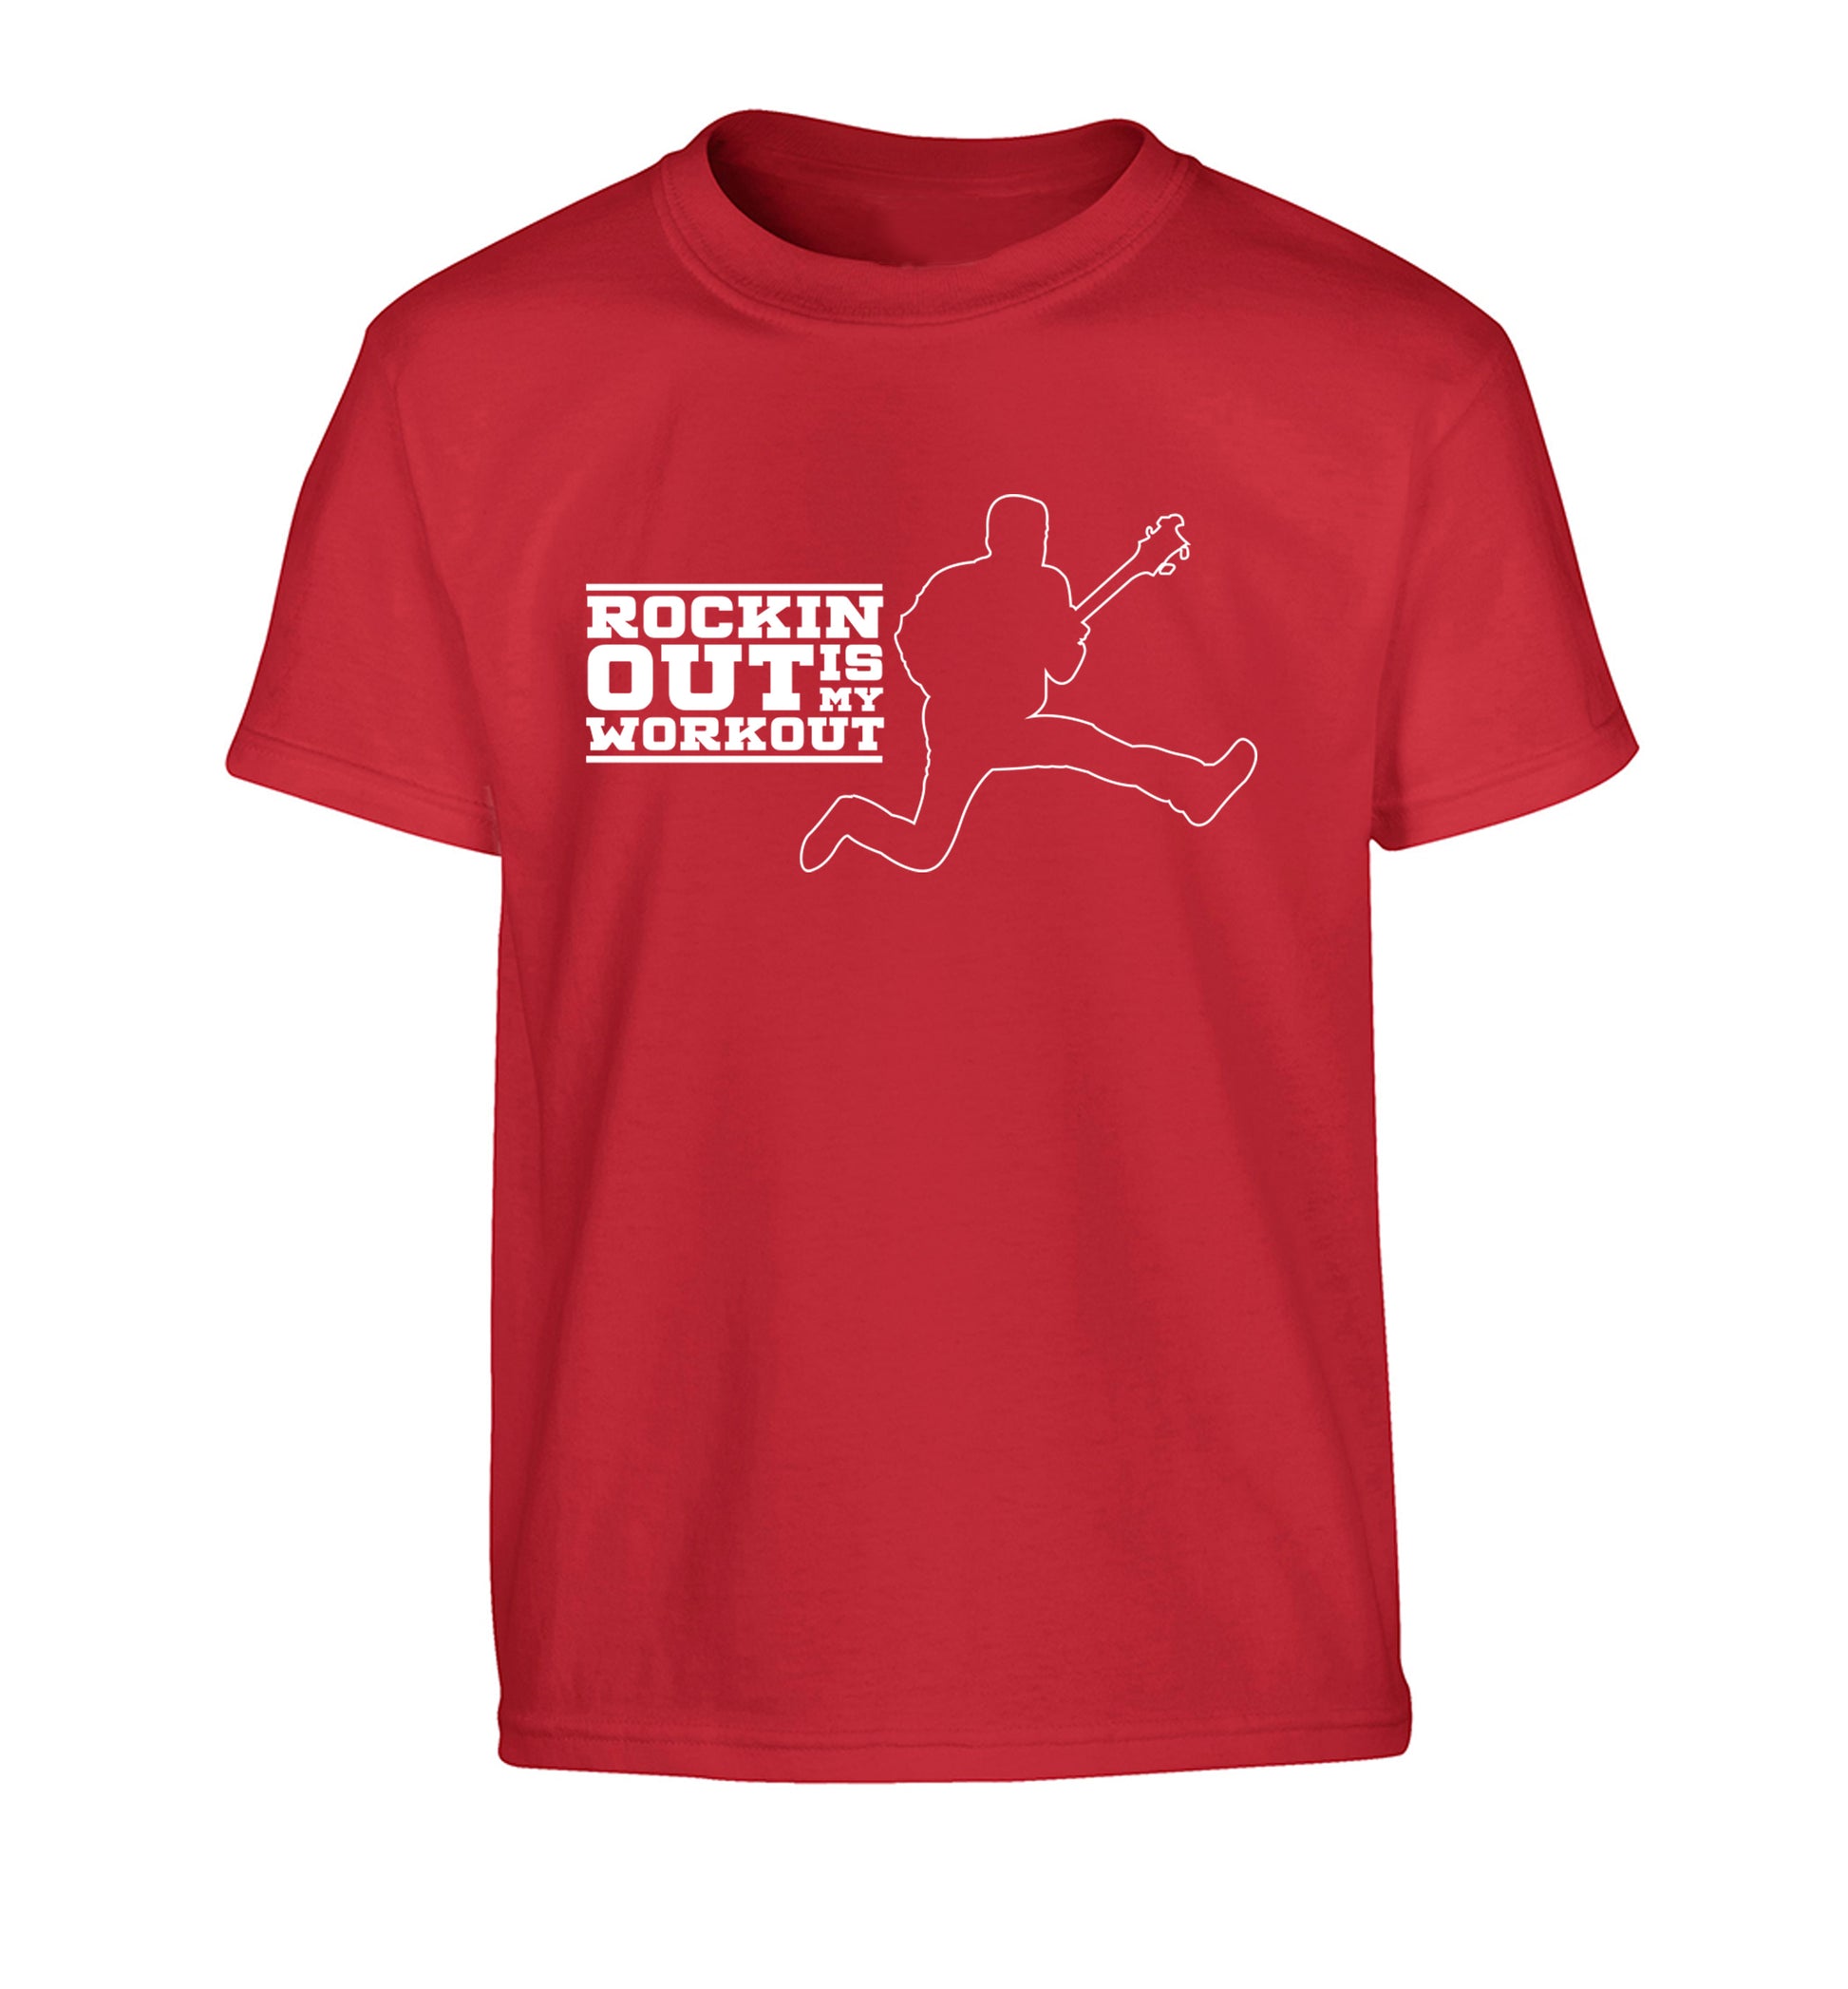 Rockin out is my workout Children's red Tshirt 12-13 Years